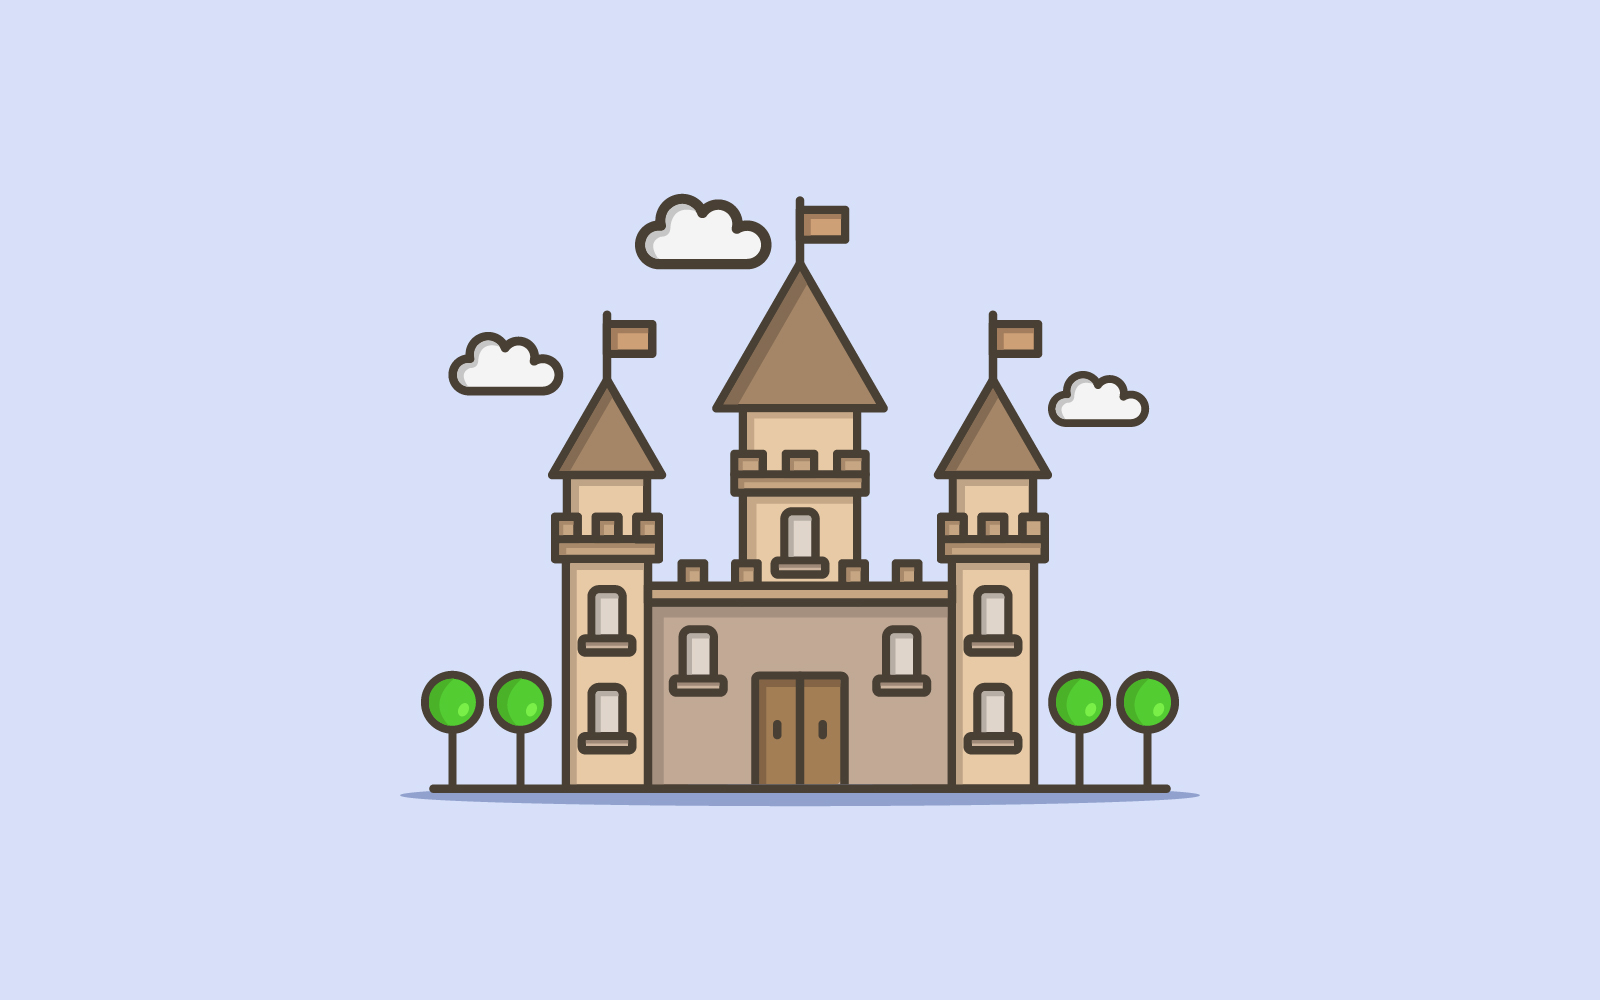 Castle illustrated and colored on a white background